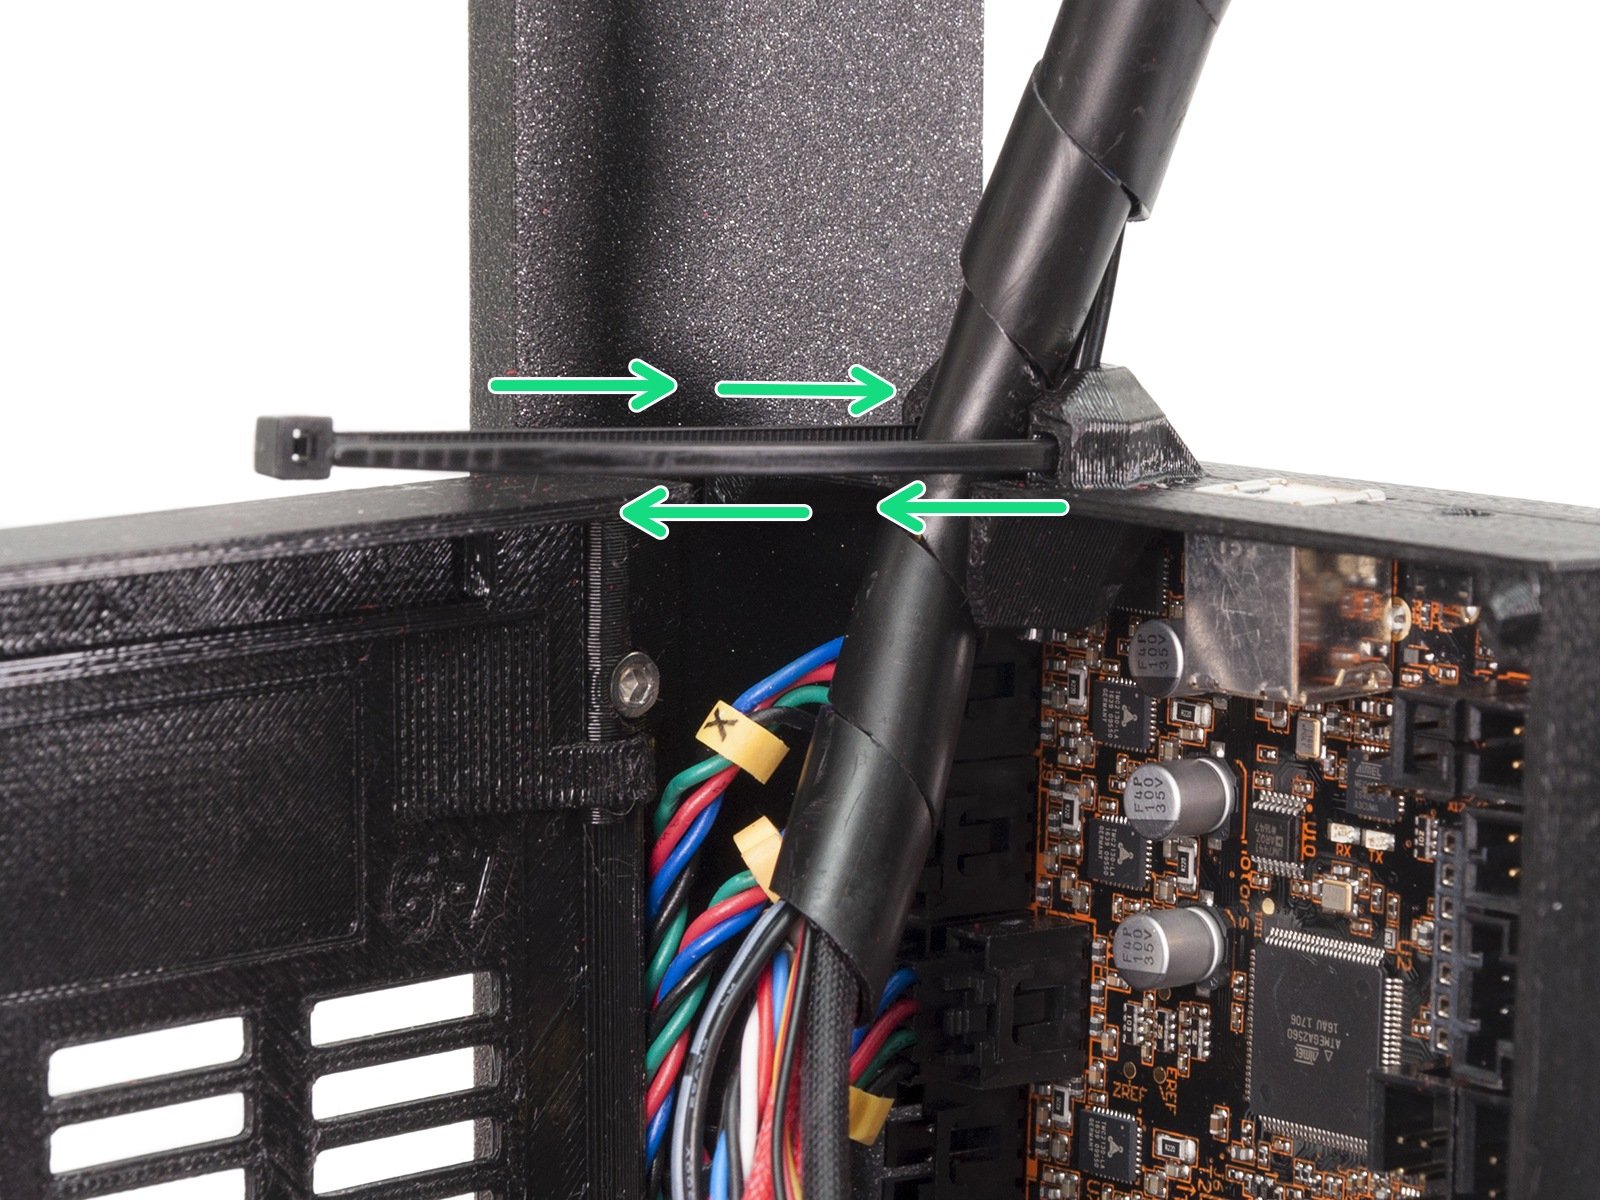 Connecting the extruder cable bundle (part 3)